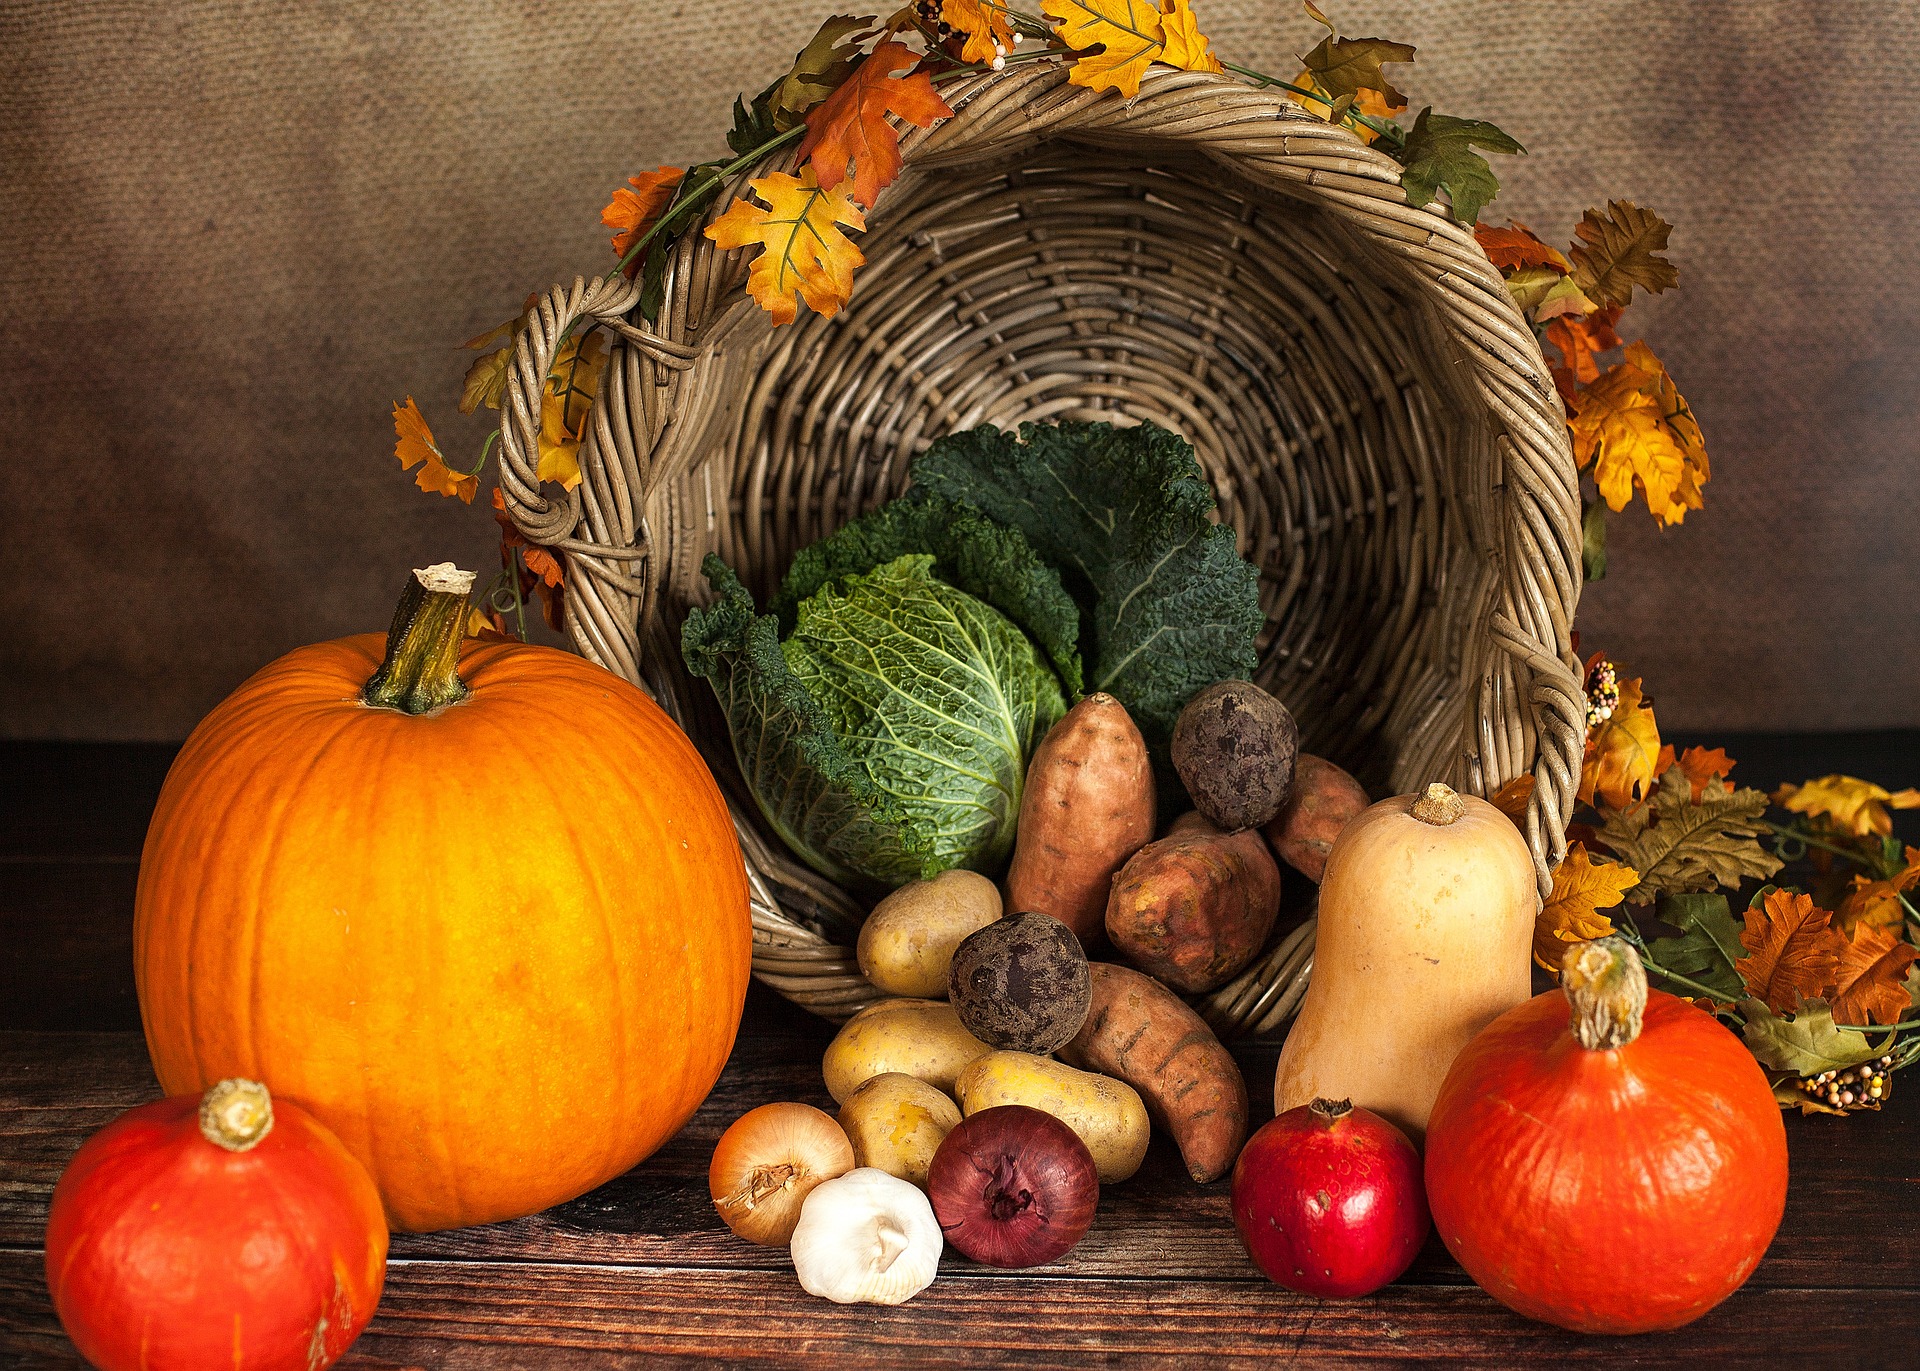 Get Ready for Turkey Day With These 5 Great Thanksgiving Apps